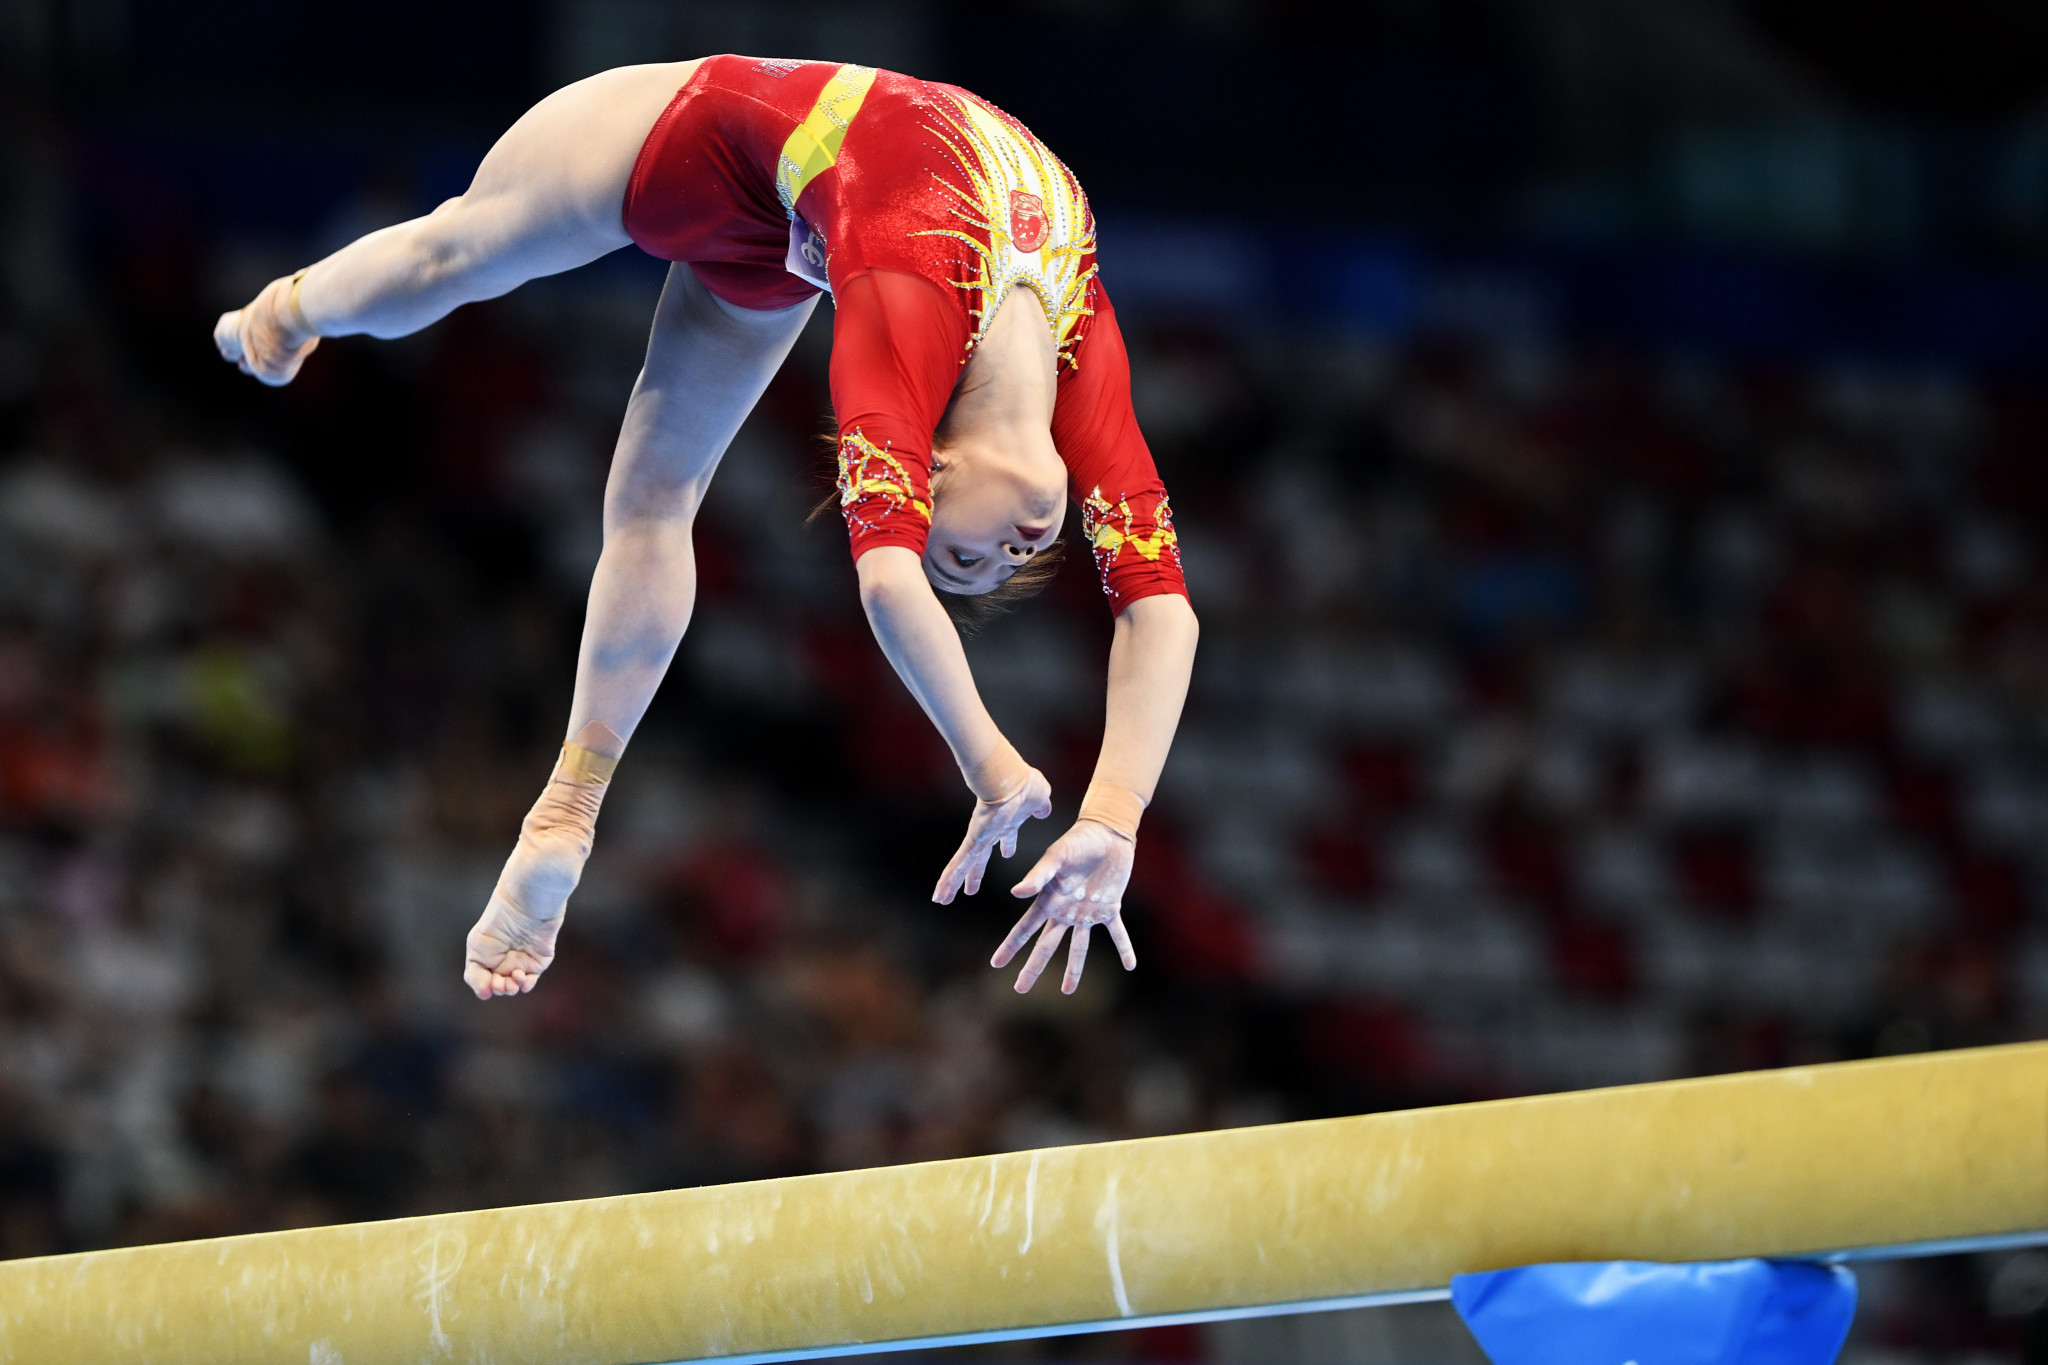 Wei Xiaoyuan 12.566 on the pommel horse also propelled the hosts to their second artistic gymnastics gold of Chengdu 2021 after yesterday's men's team win ©Chengdu 2021